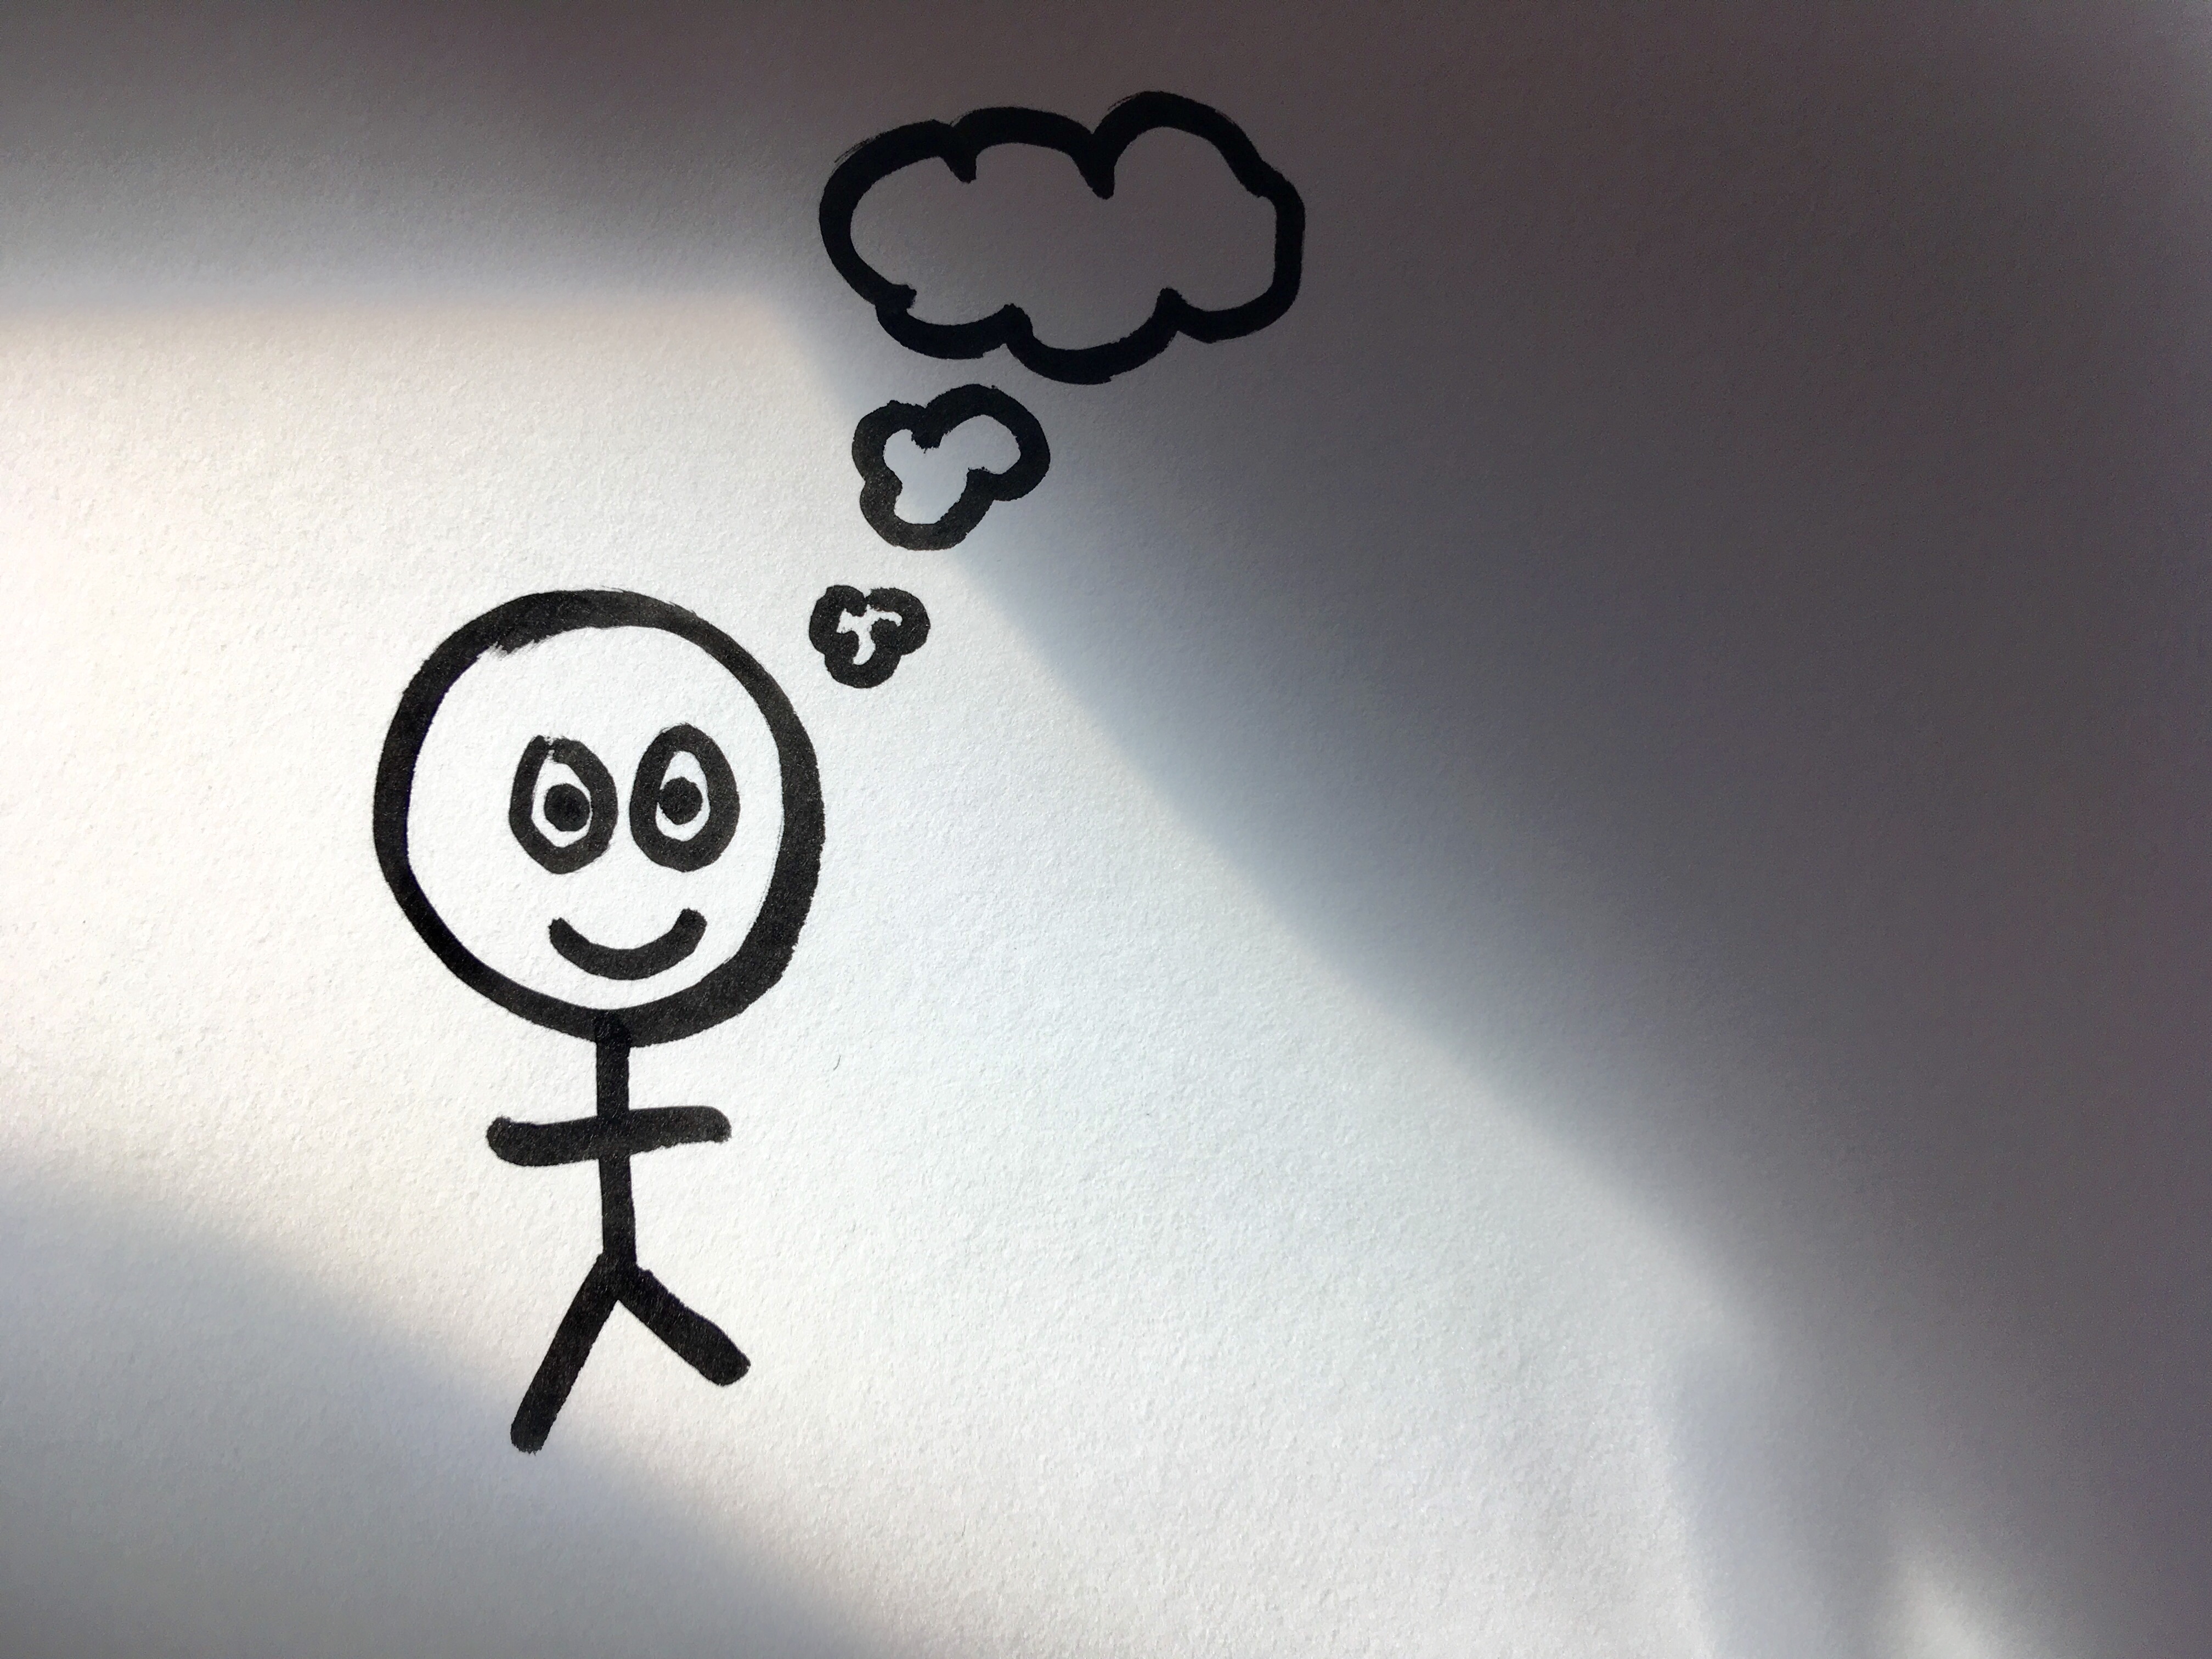 Stick figure with thinking cloud